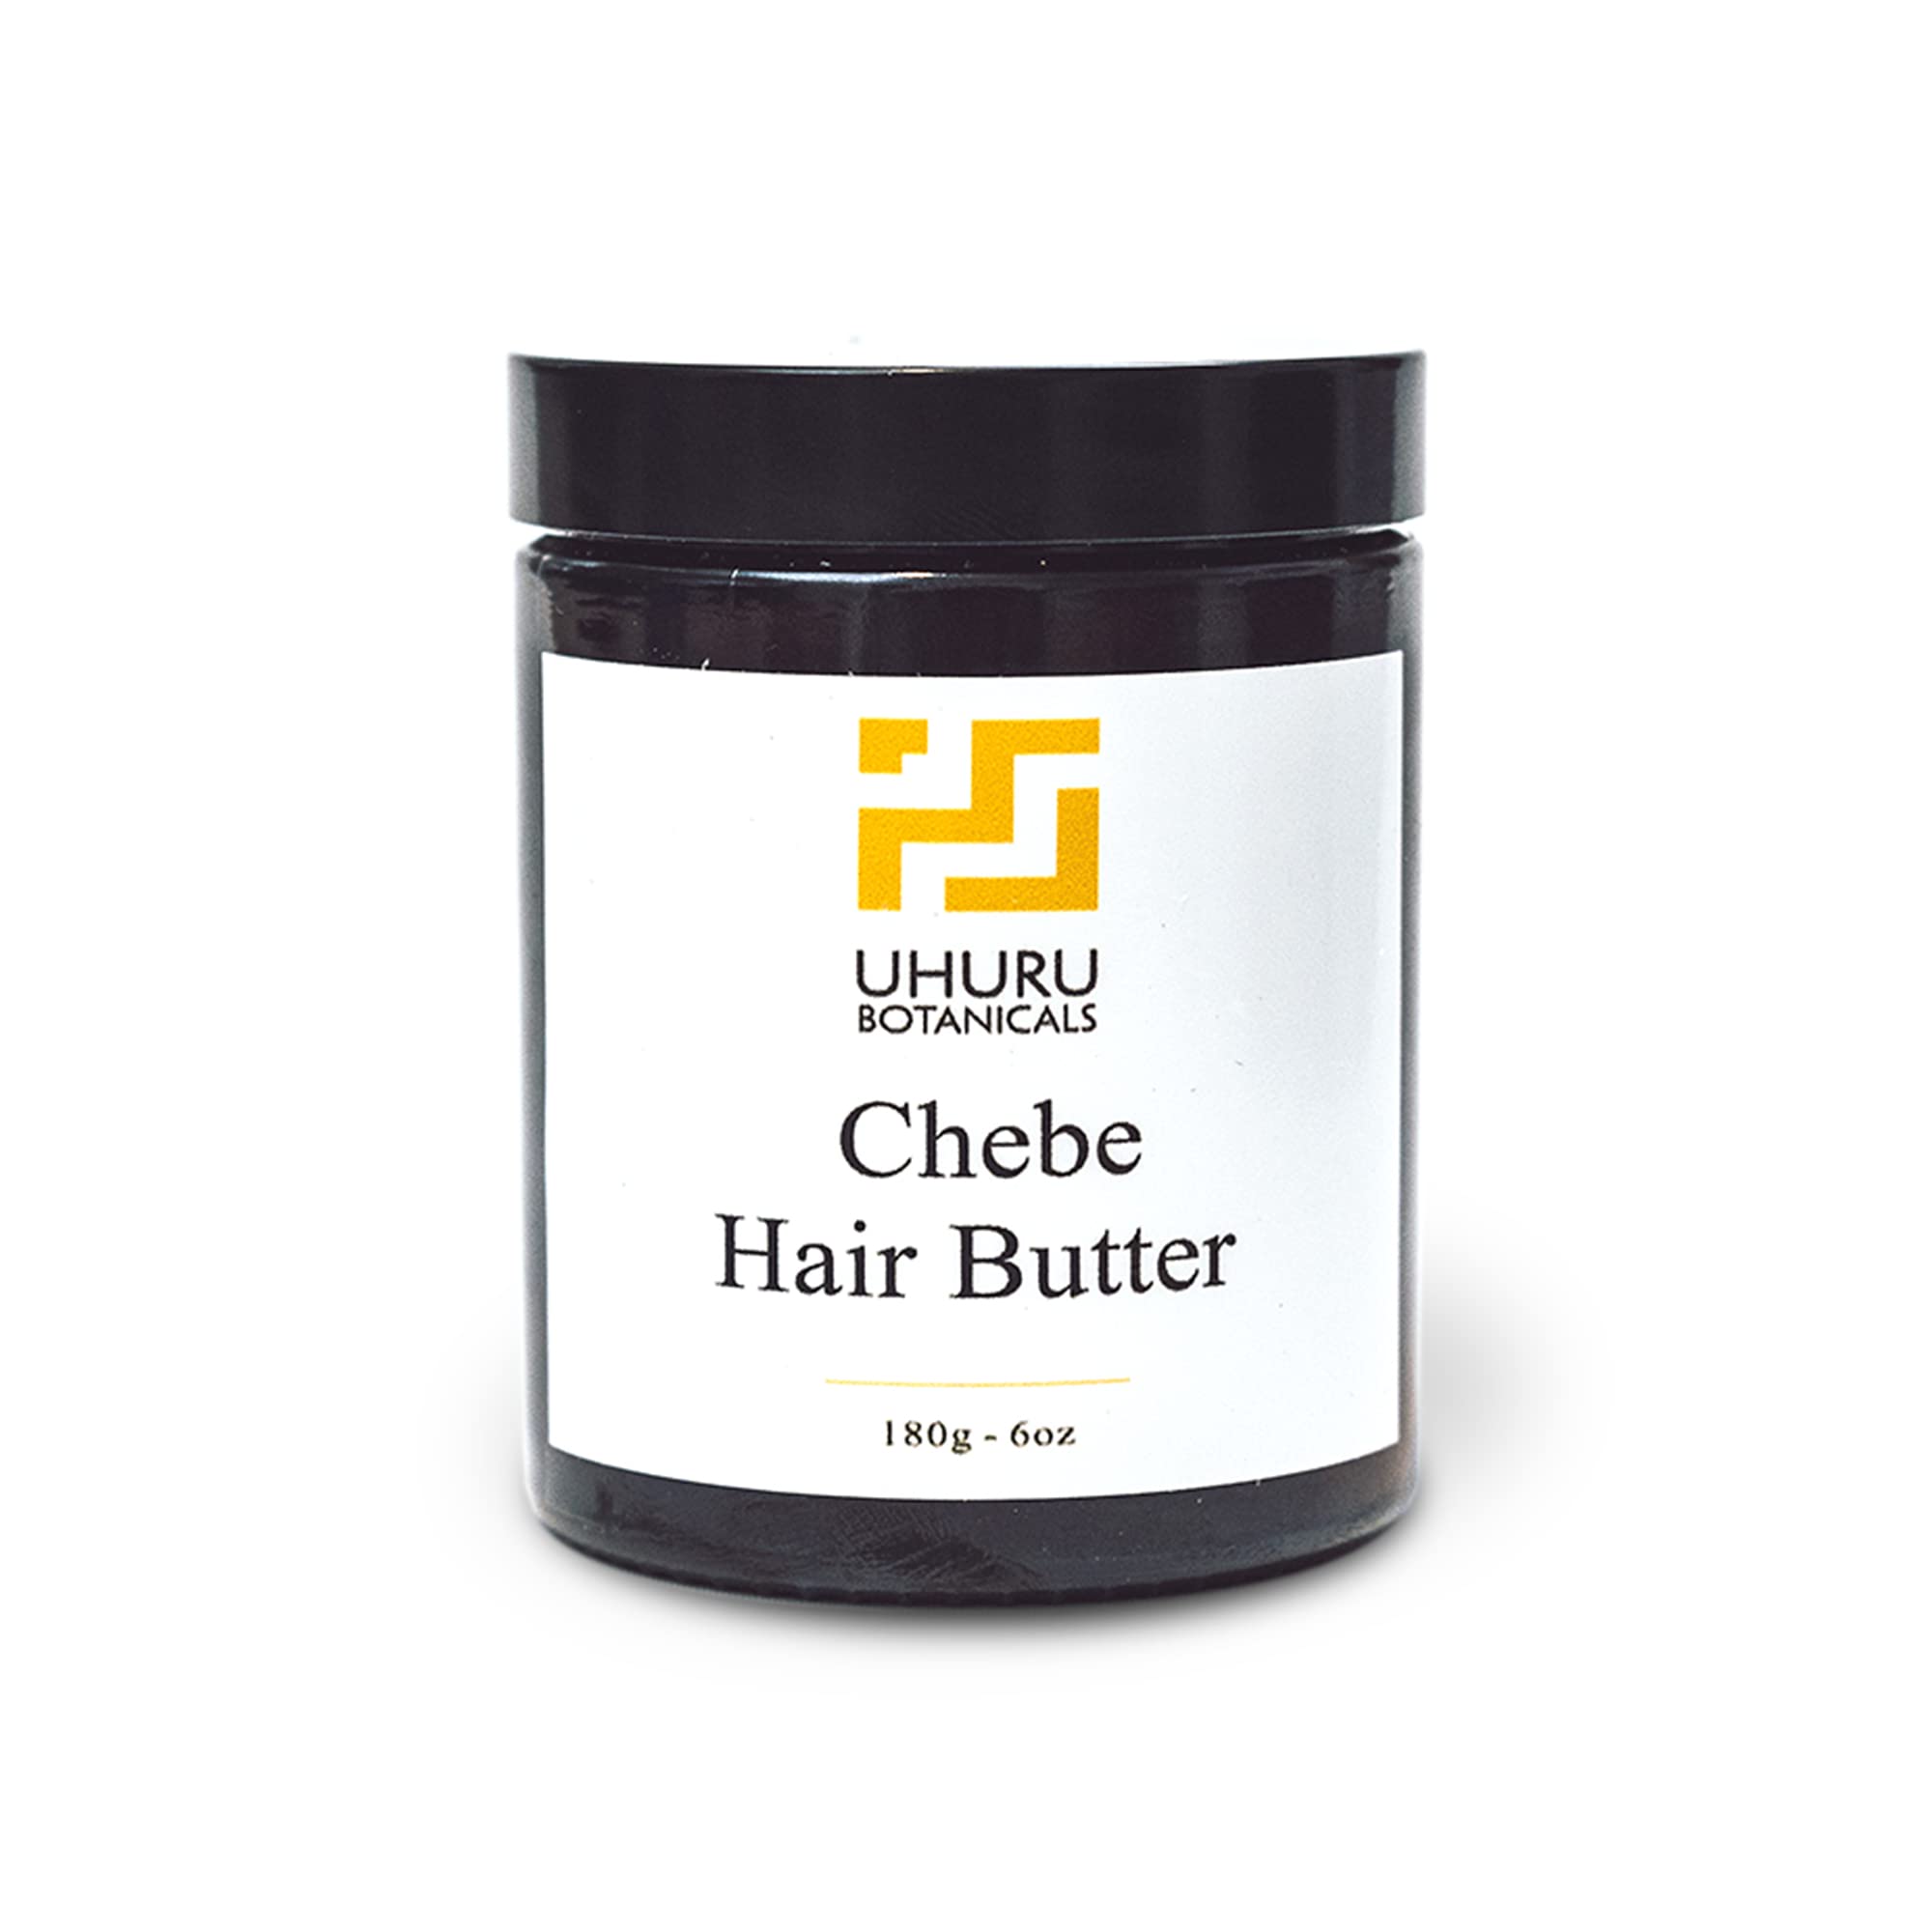 Uhuru Botanicals - Chebe Hair Butter, Paraben-Free Chebe and Shea Butter Hair Product for Split Ends Treatment, Nourishing Vegan Hair Butter for All Hair Types, 6 oz